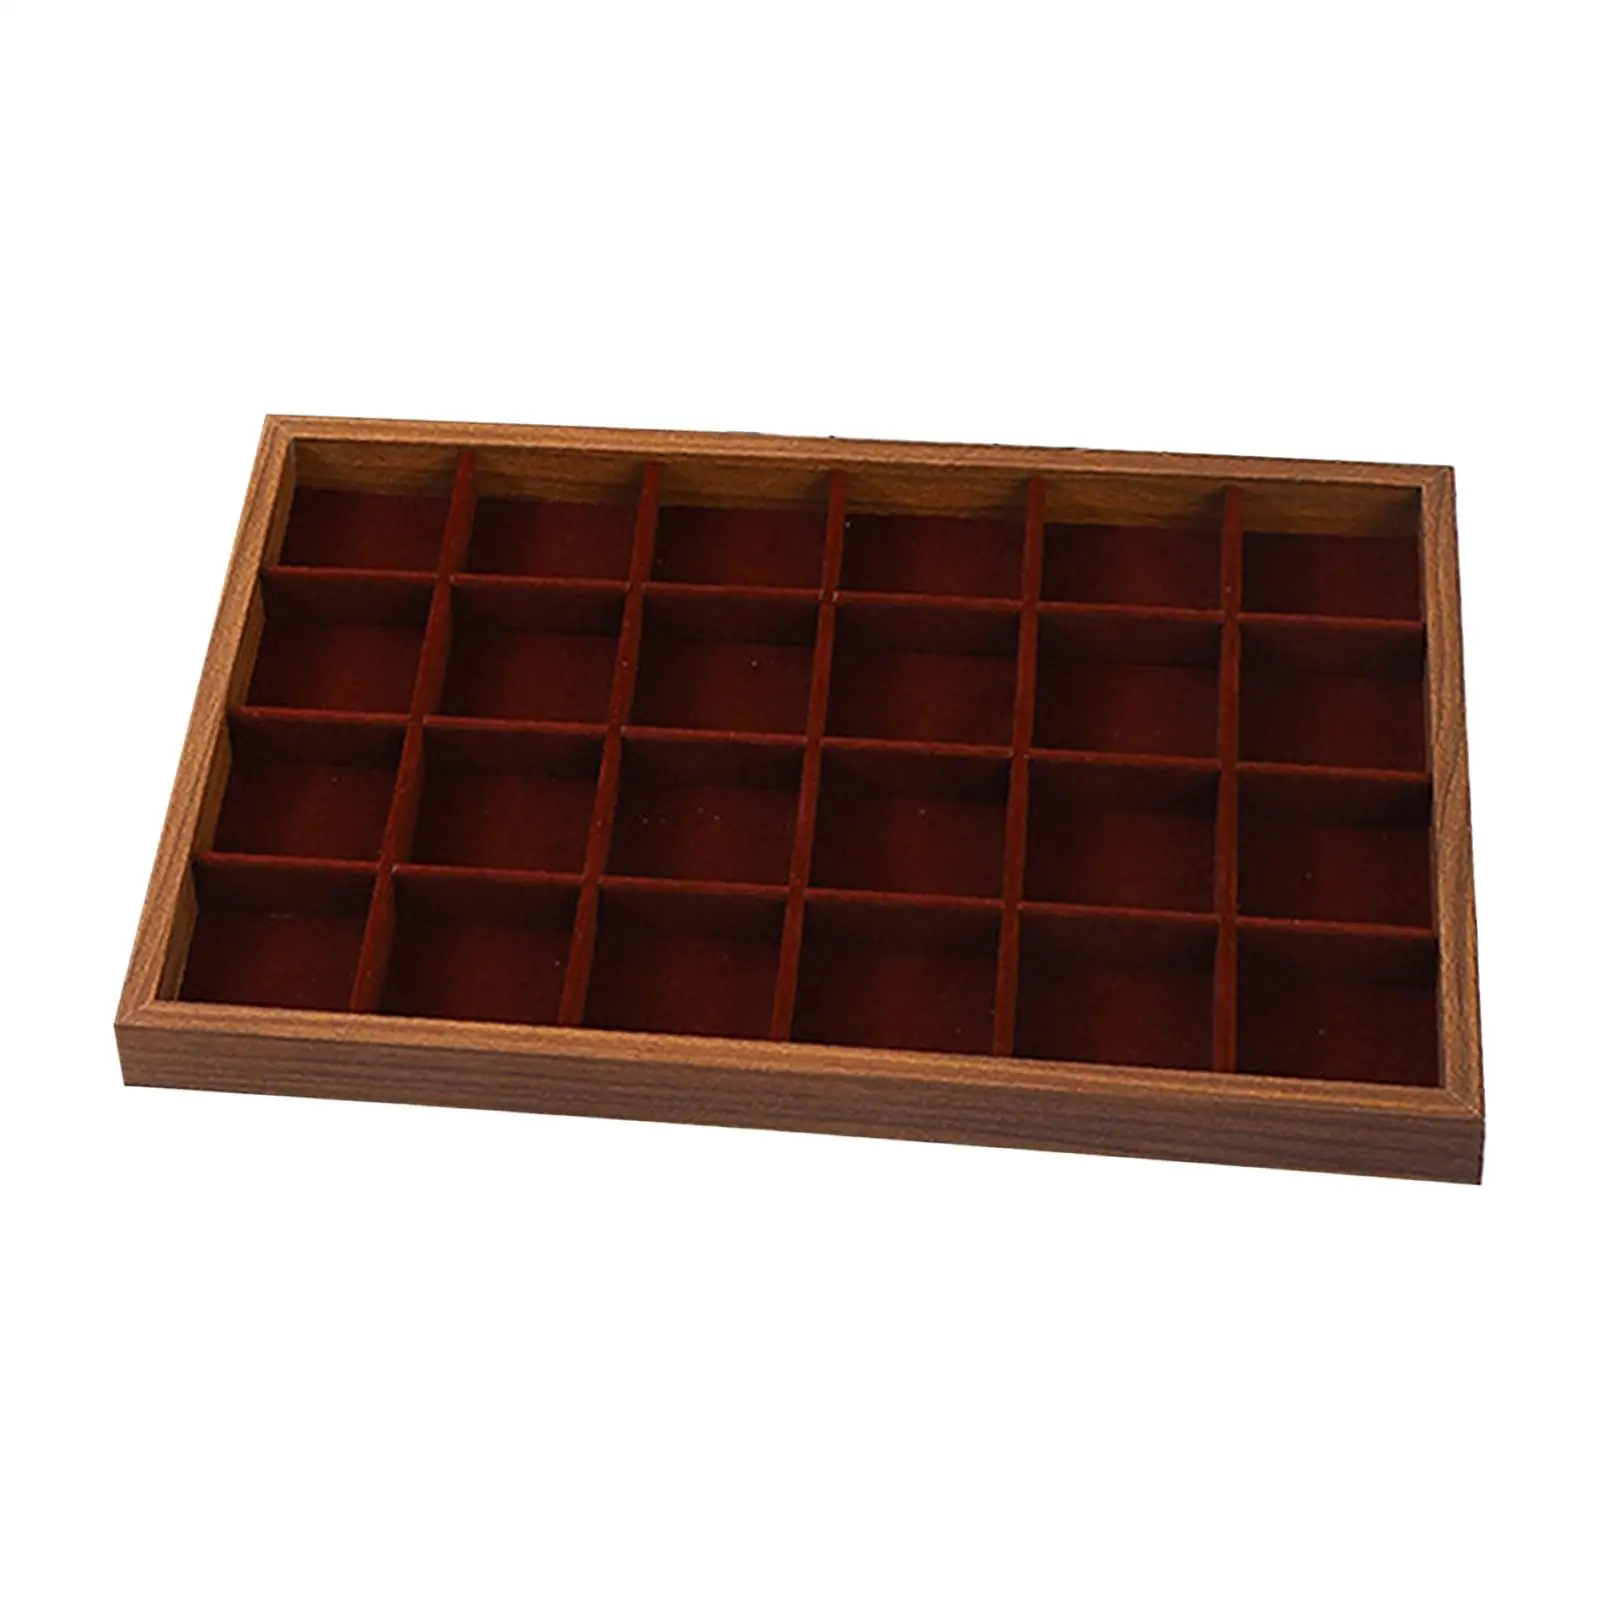 24 Grid Jewelry Drawer Organizer Tray Wood Stackable Practical Accessories Fashion Jewelry Trays for Necklaces Dresser Bracelet